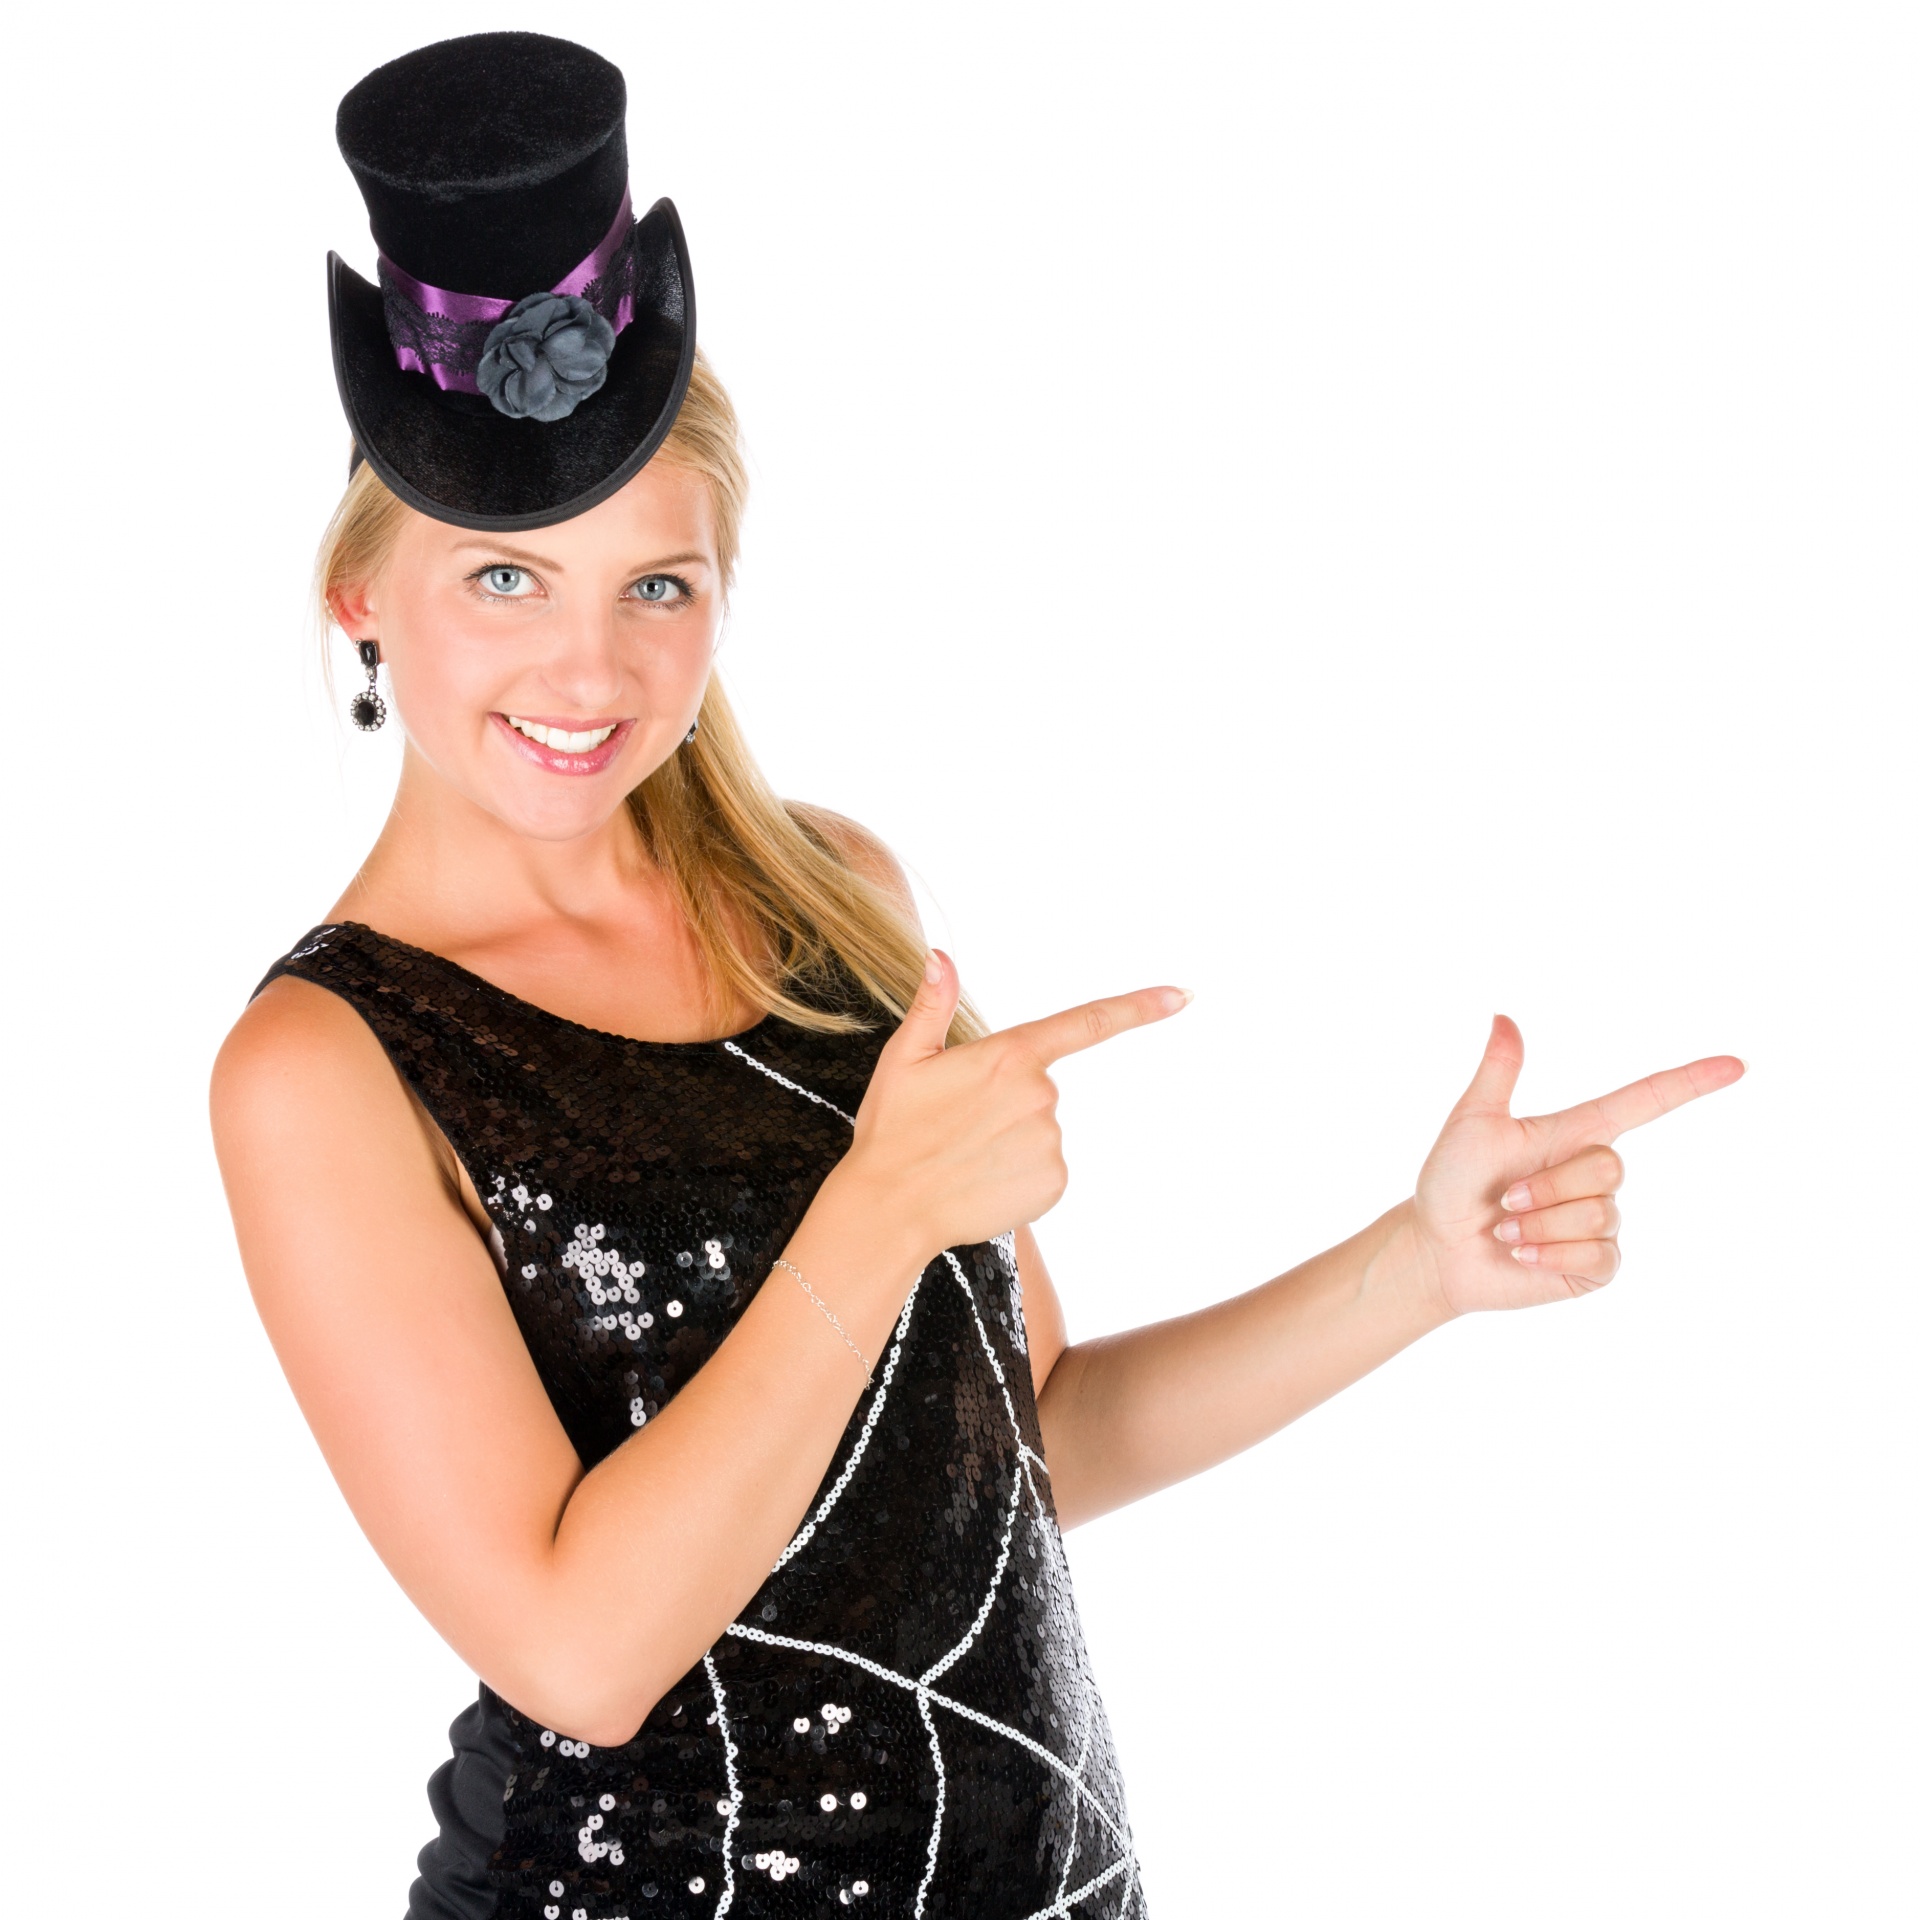 Young woman in Halloween costume pointing her fingers